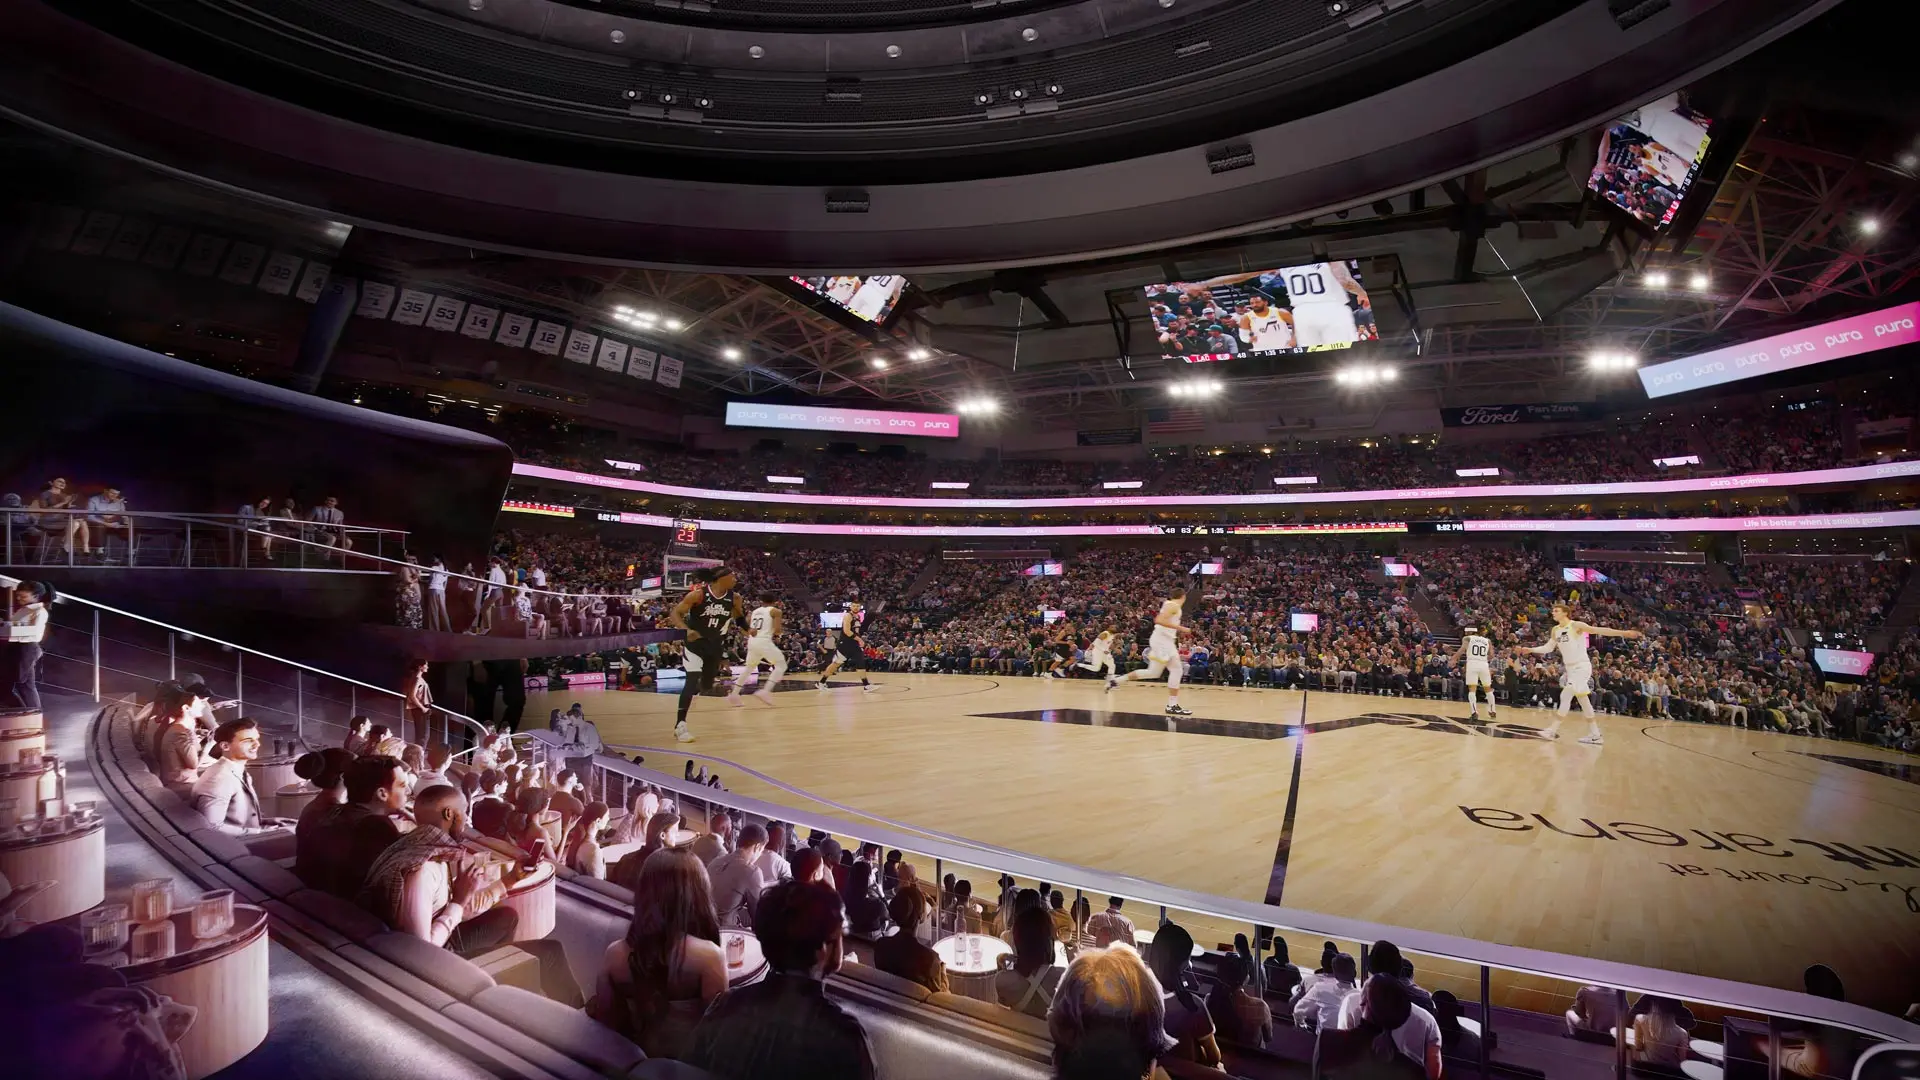 The Dome NBA Rendering